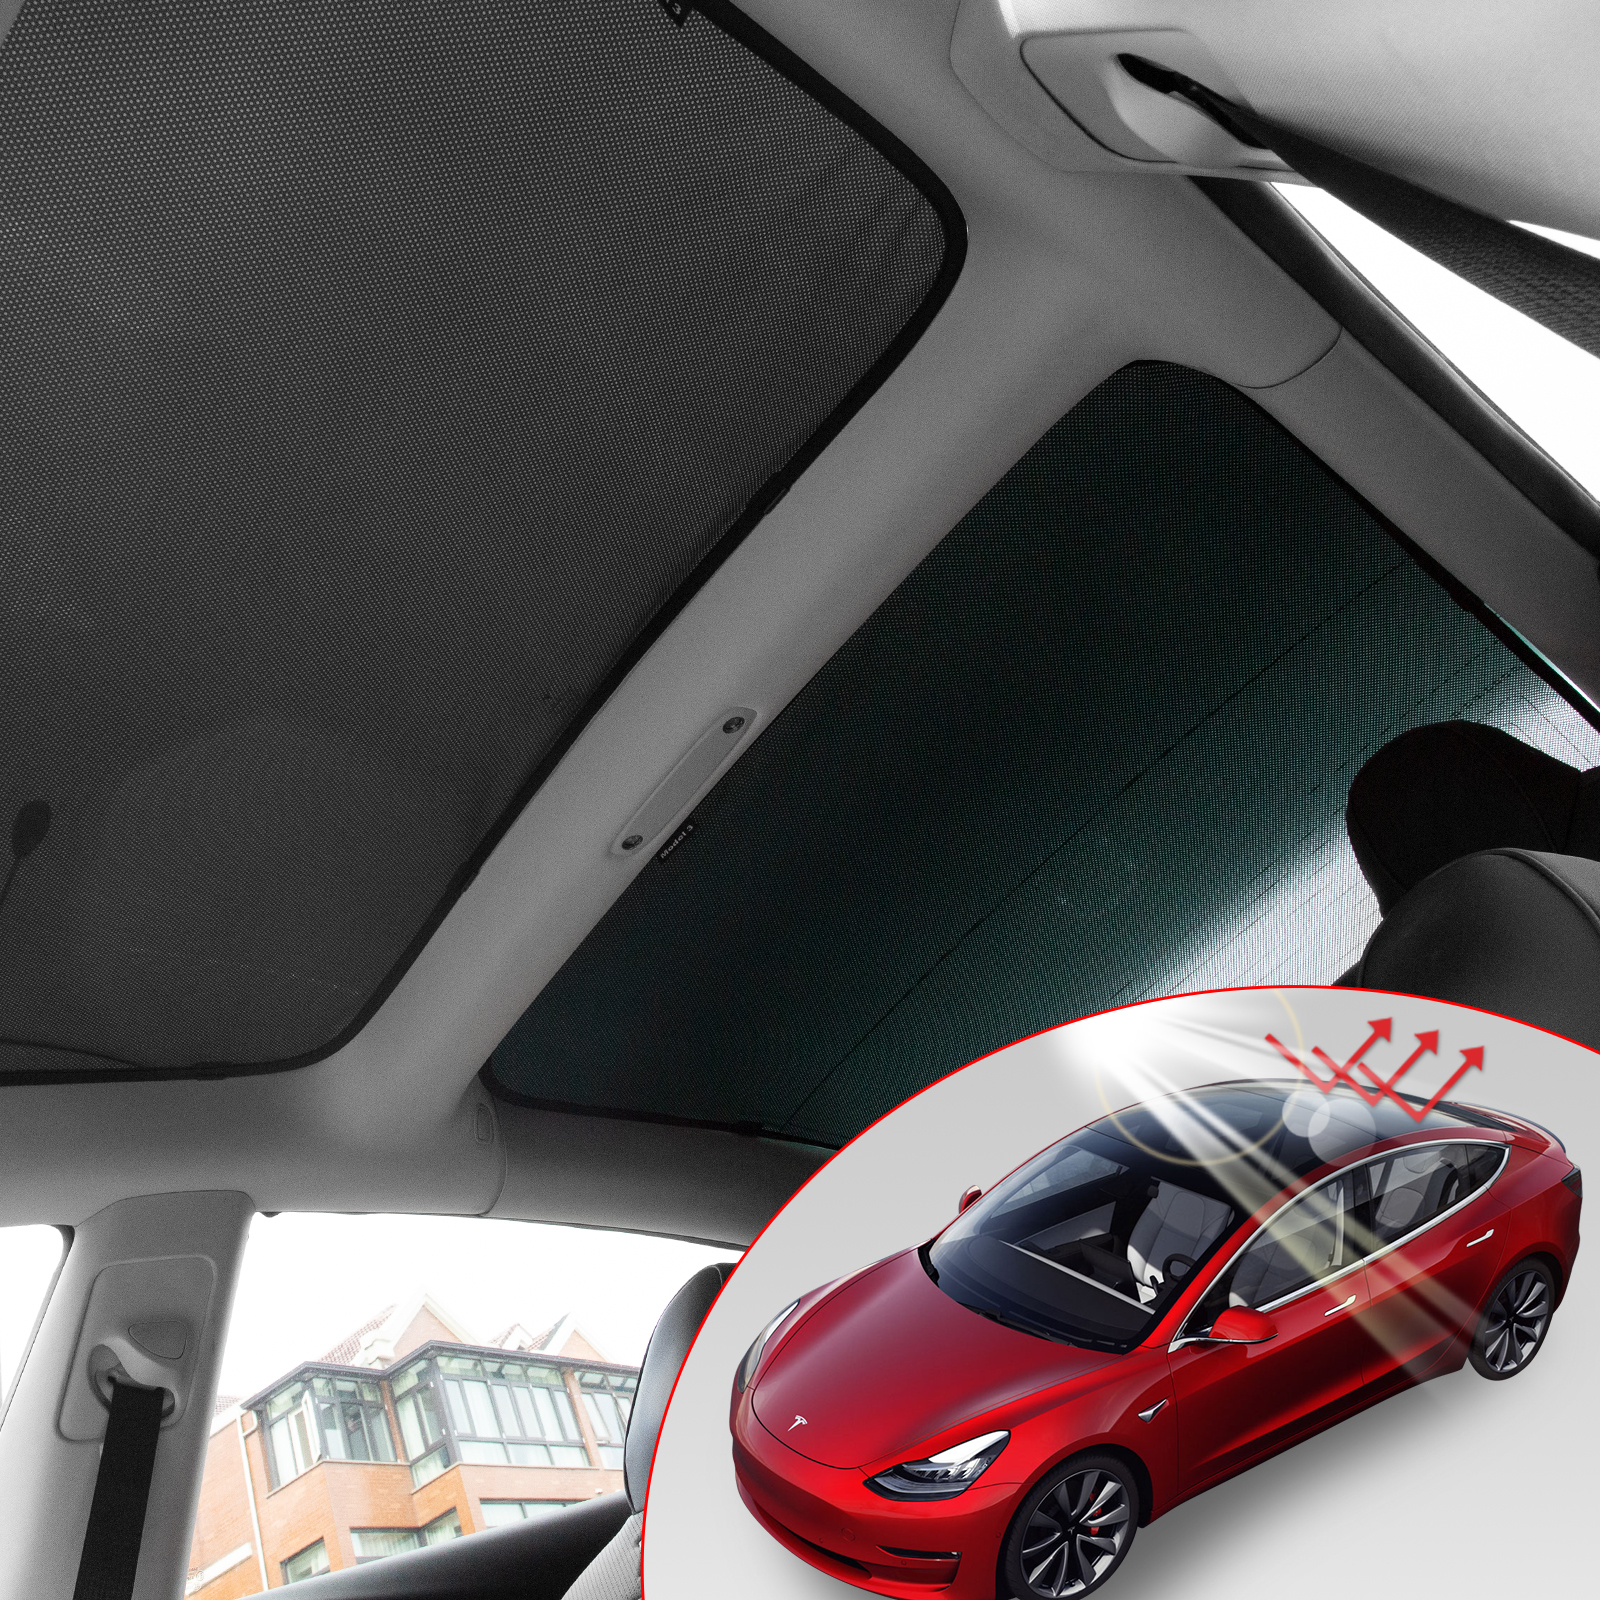 Black, 2017-2020 Model 3 Full Cover Xipoo Fit Tesla Model 3 Sun Shades Glass Roof Sunshade Sunroof Rear Window Sunshade Foldable for Tesla Model 3 Accessories Upgrade Two-Layer 6 Pcs 